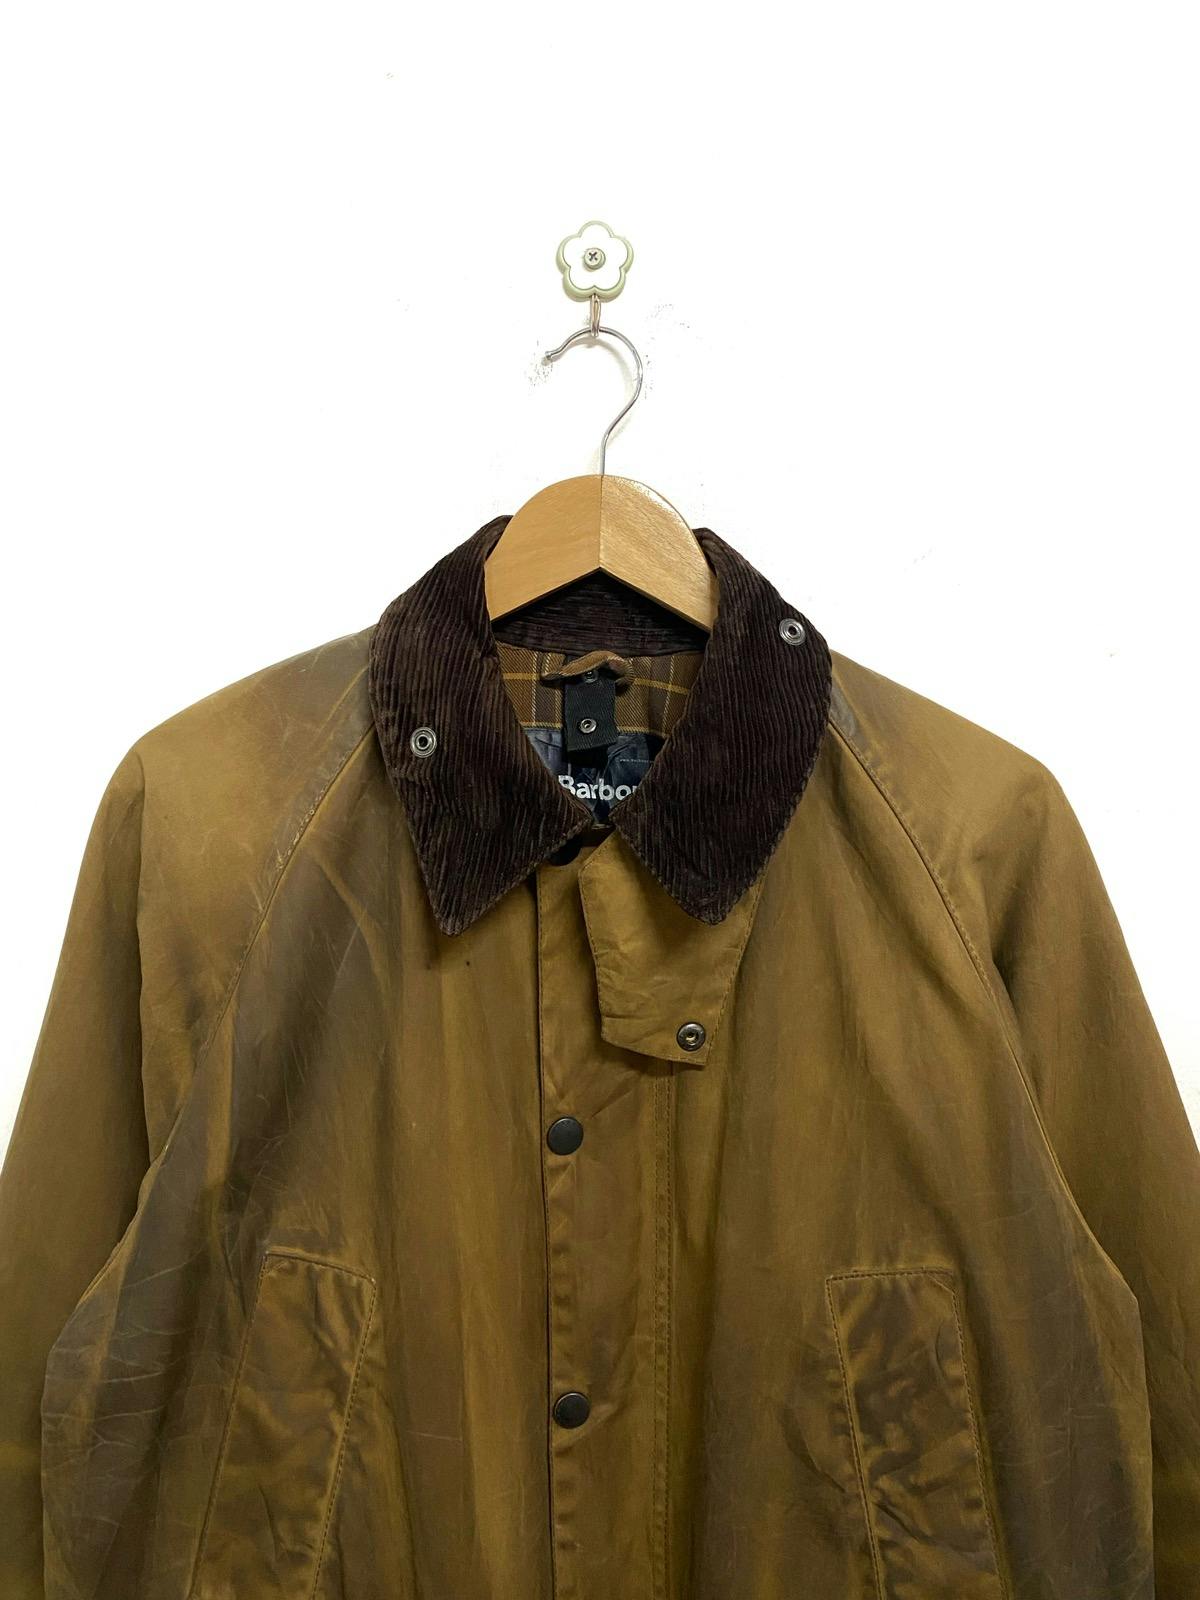 Barbour Classic Bedale Wax Jacket Made in England - 3